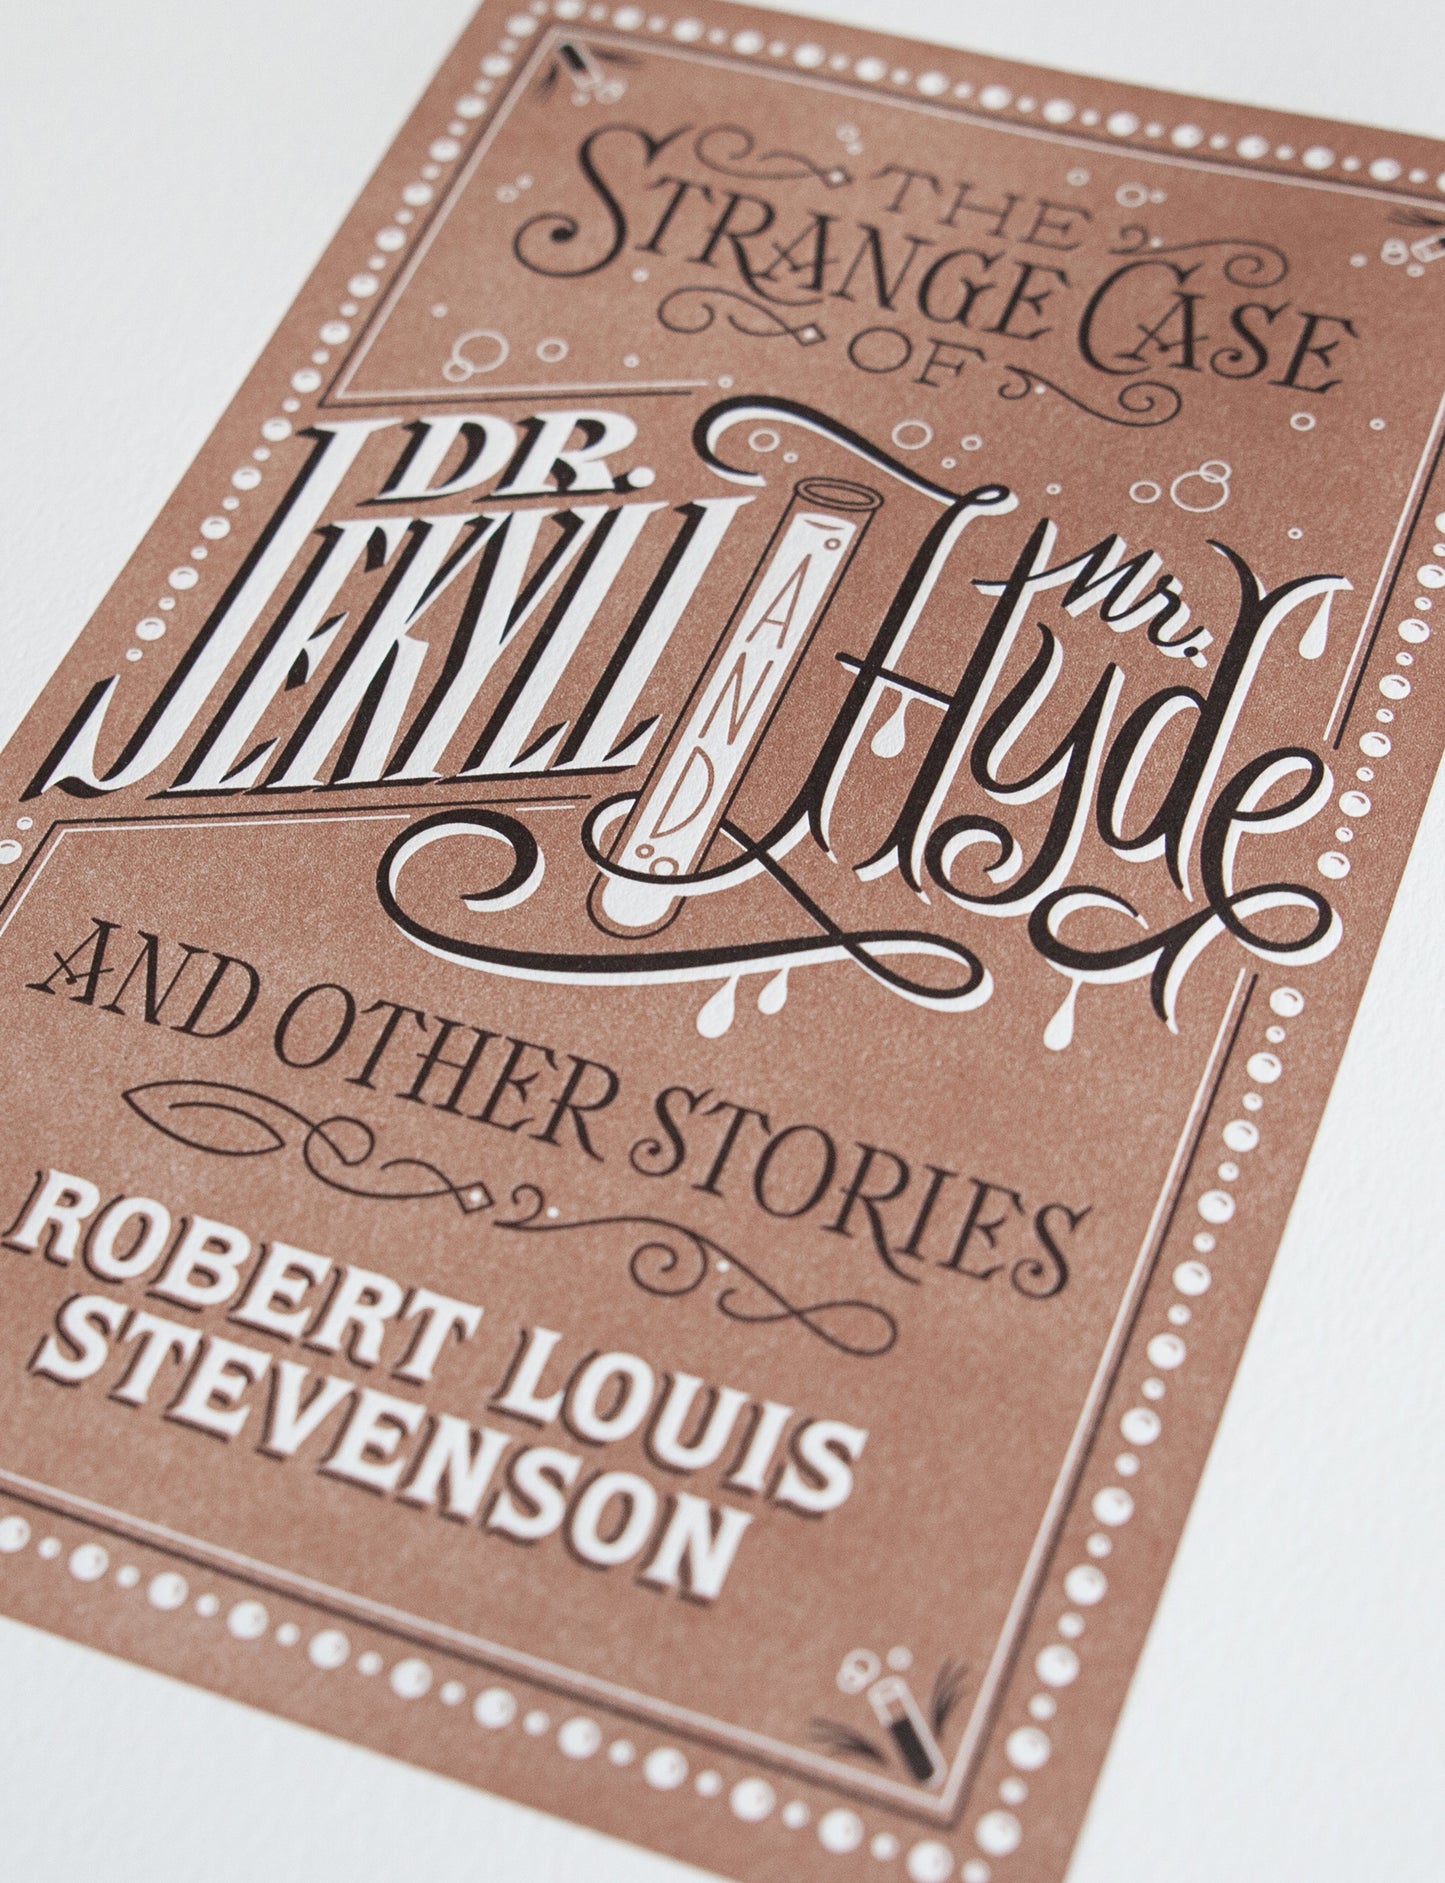 Close-up of a 2-color letterpress print in brown and black. Printed artwork is an illustrated book cover of Dr. Jekyll and Mr. Hyde including custom hand lettering.